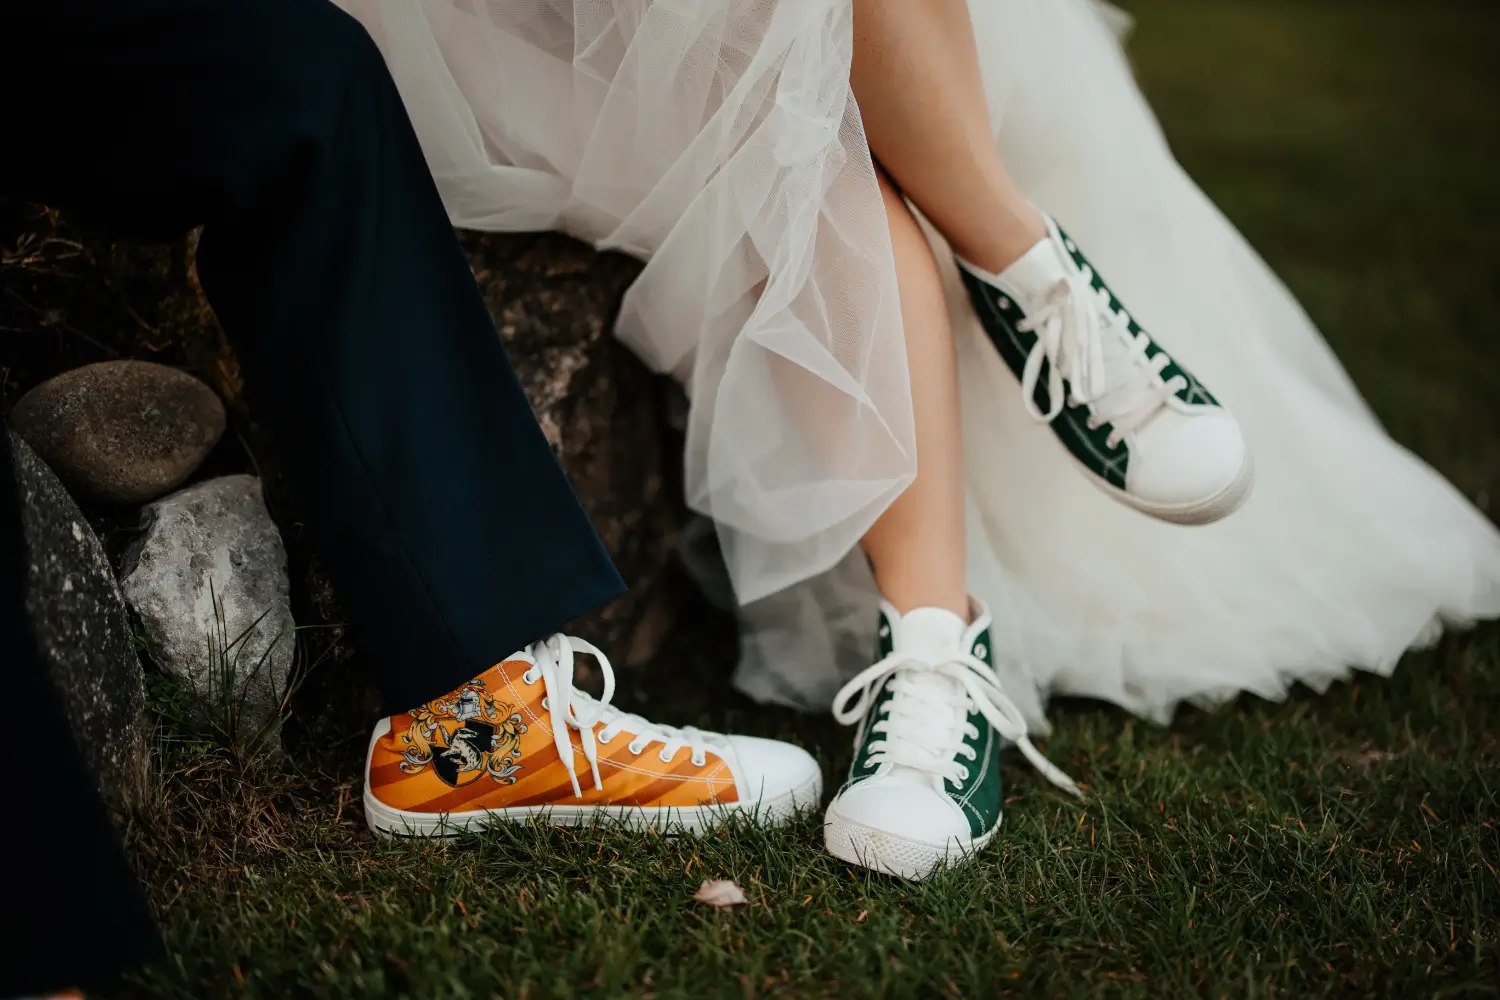 His and hers wedding shoes